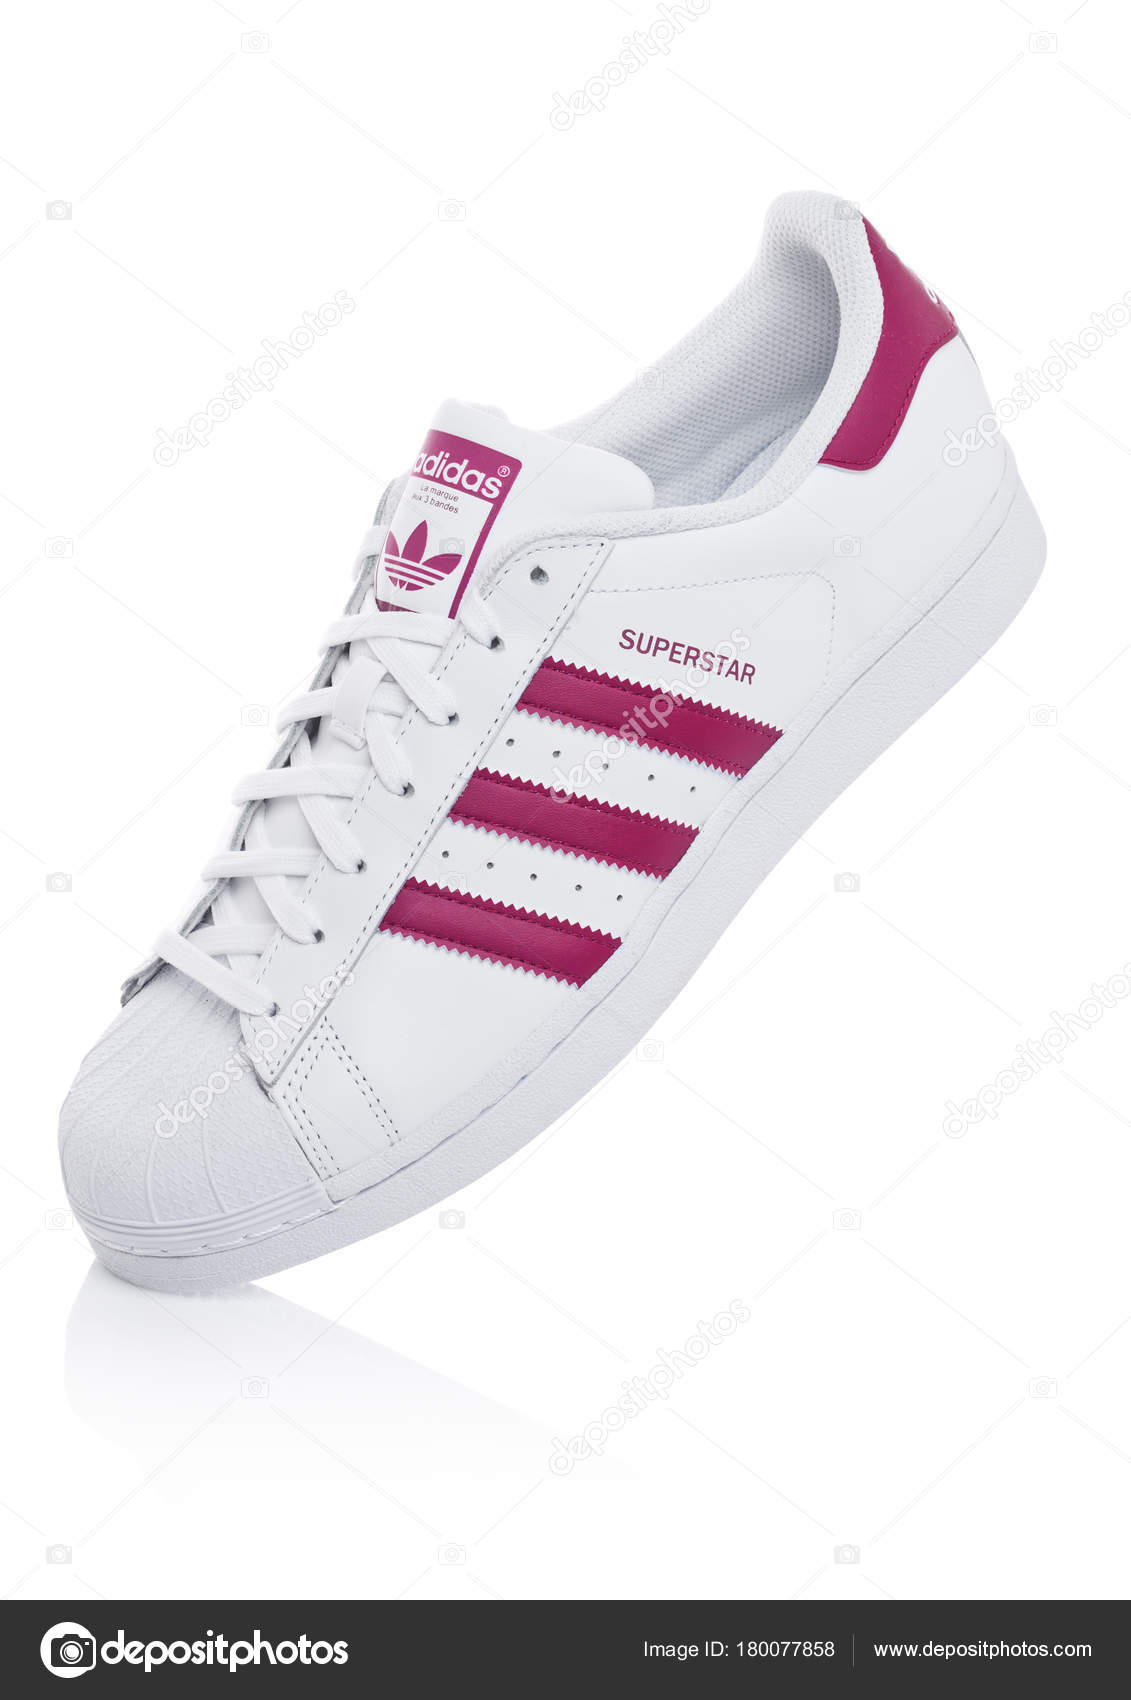 LONDON, UK - JANUARY 12, 2018: Adidas Originals Superstar red shoes on white.German multinational corporation that designs and manufactures sports clothing and accessories. – Stock Editorial Photo © DenisMArt #180077858